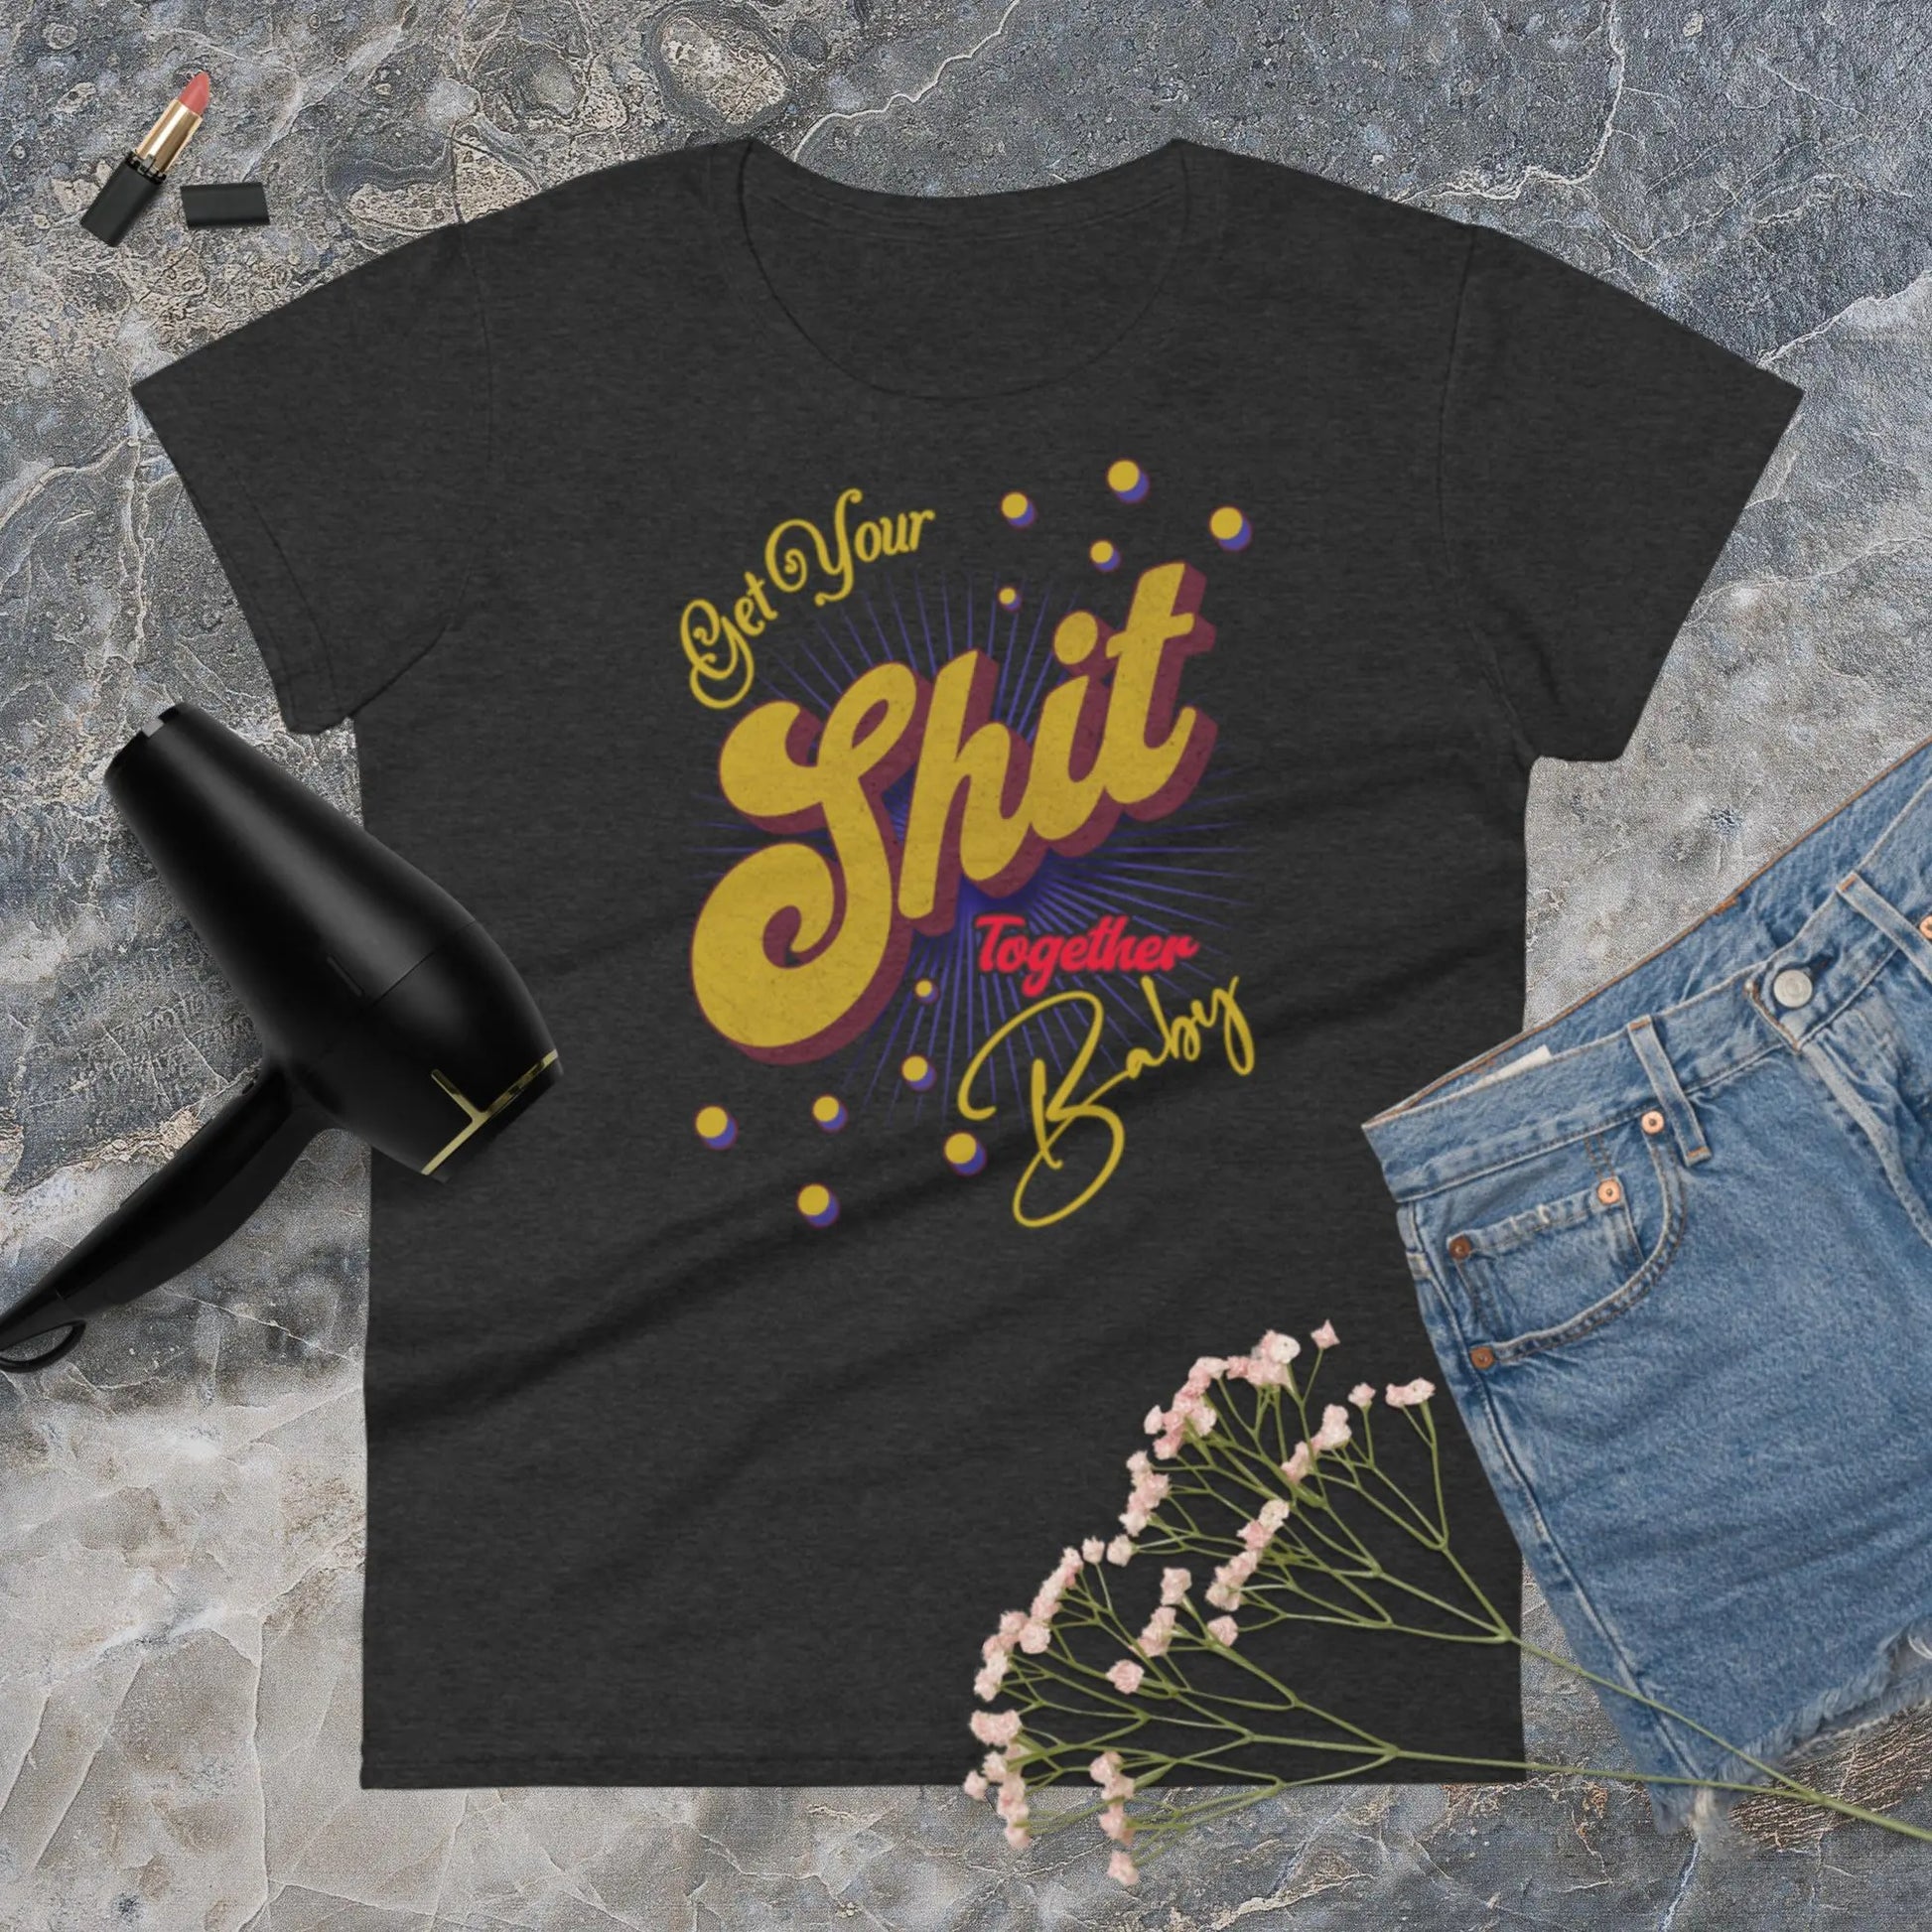 Get Your Shit Together Women's Fashion Fit t-shirt by BC Ink Works - BC Ink Works